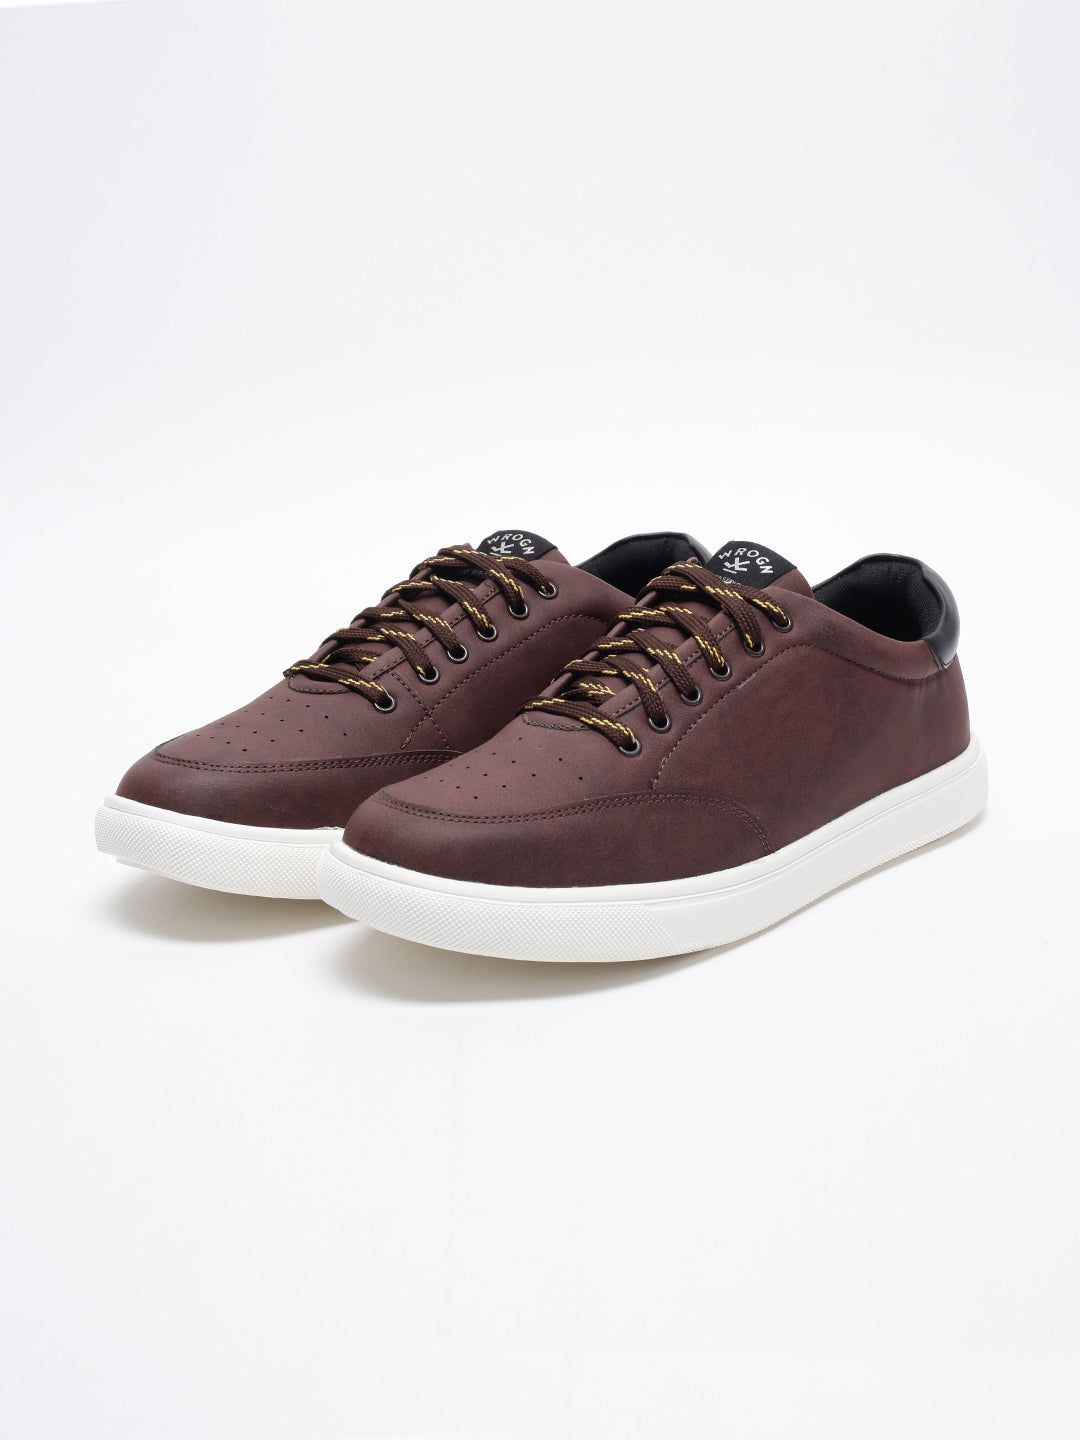 Solid Brown Classic Sneakers